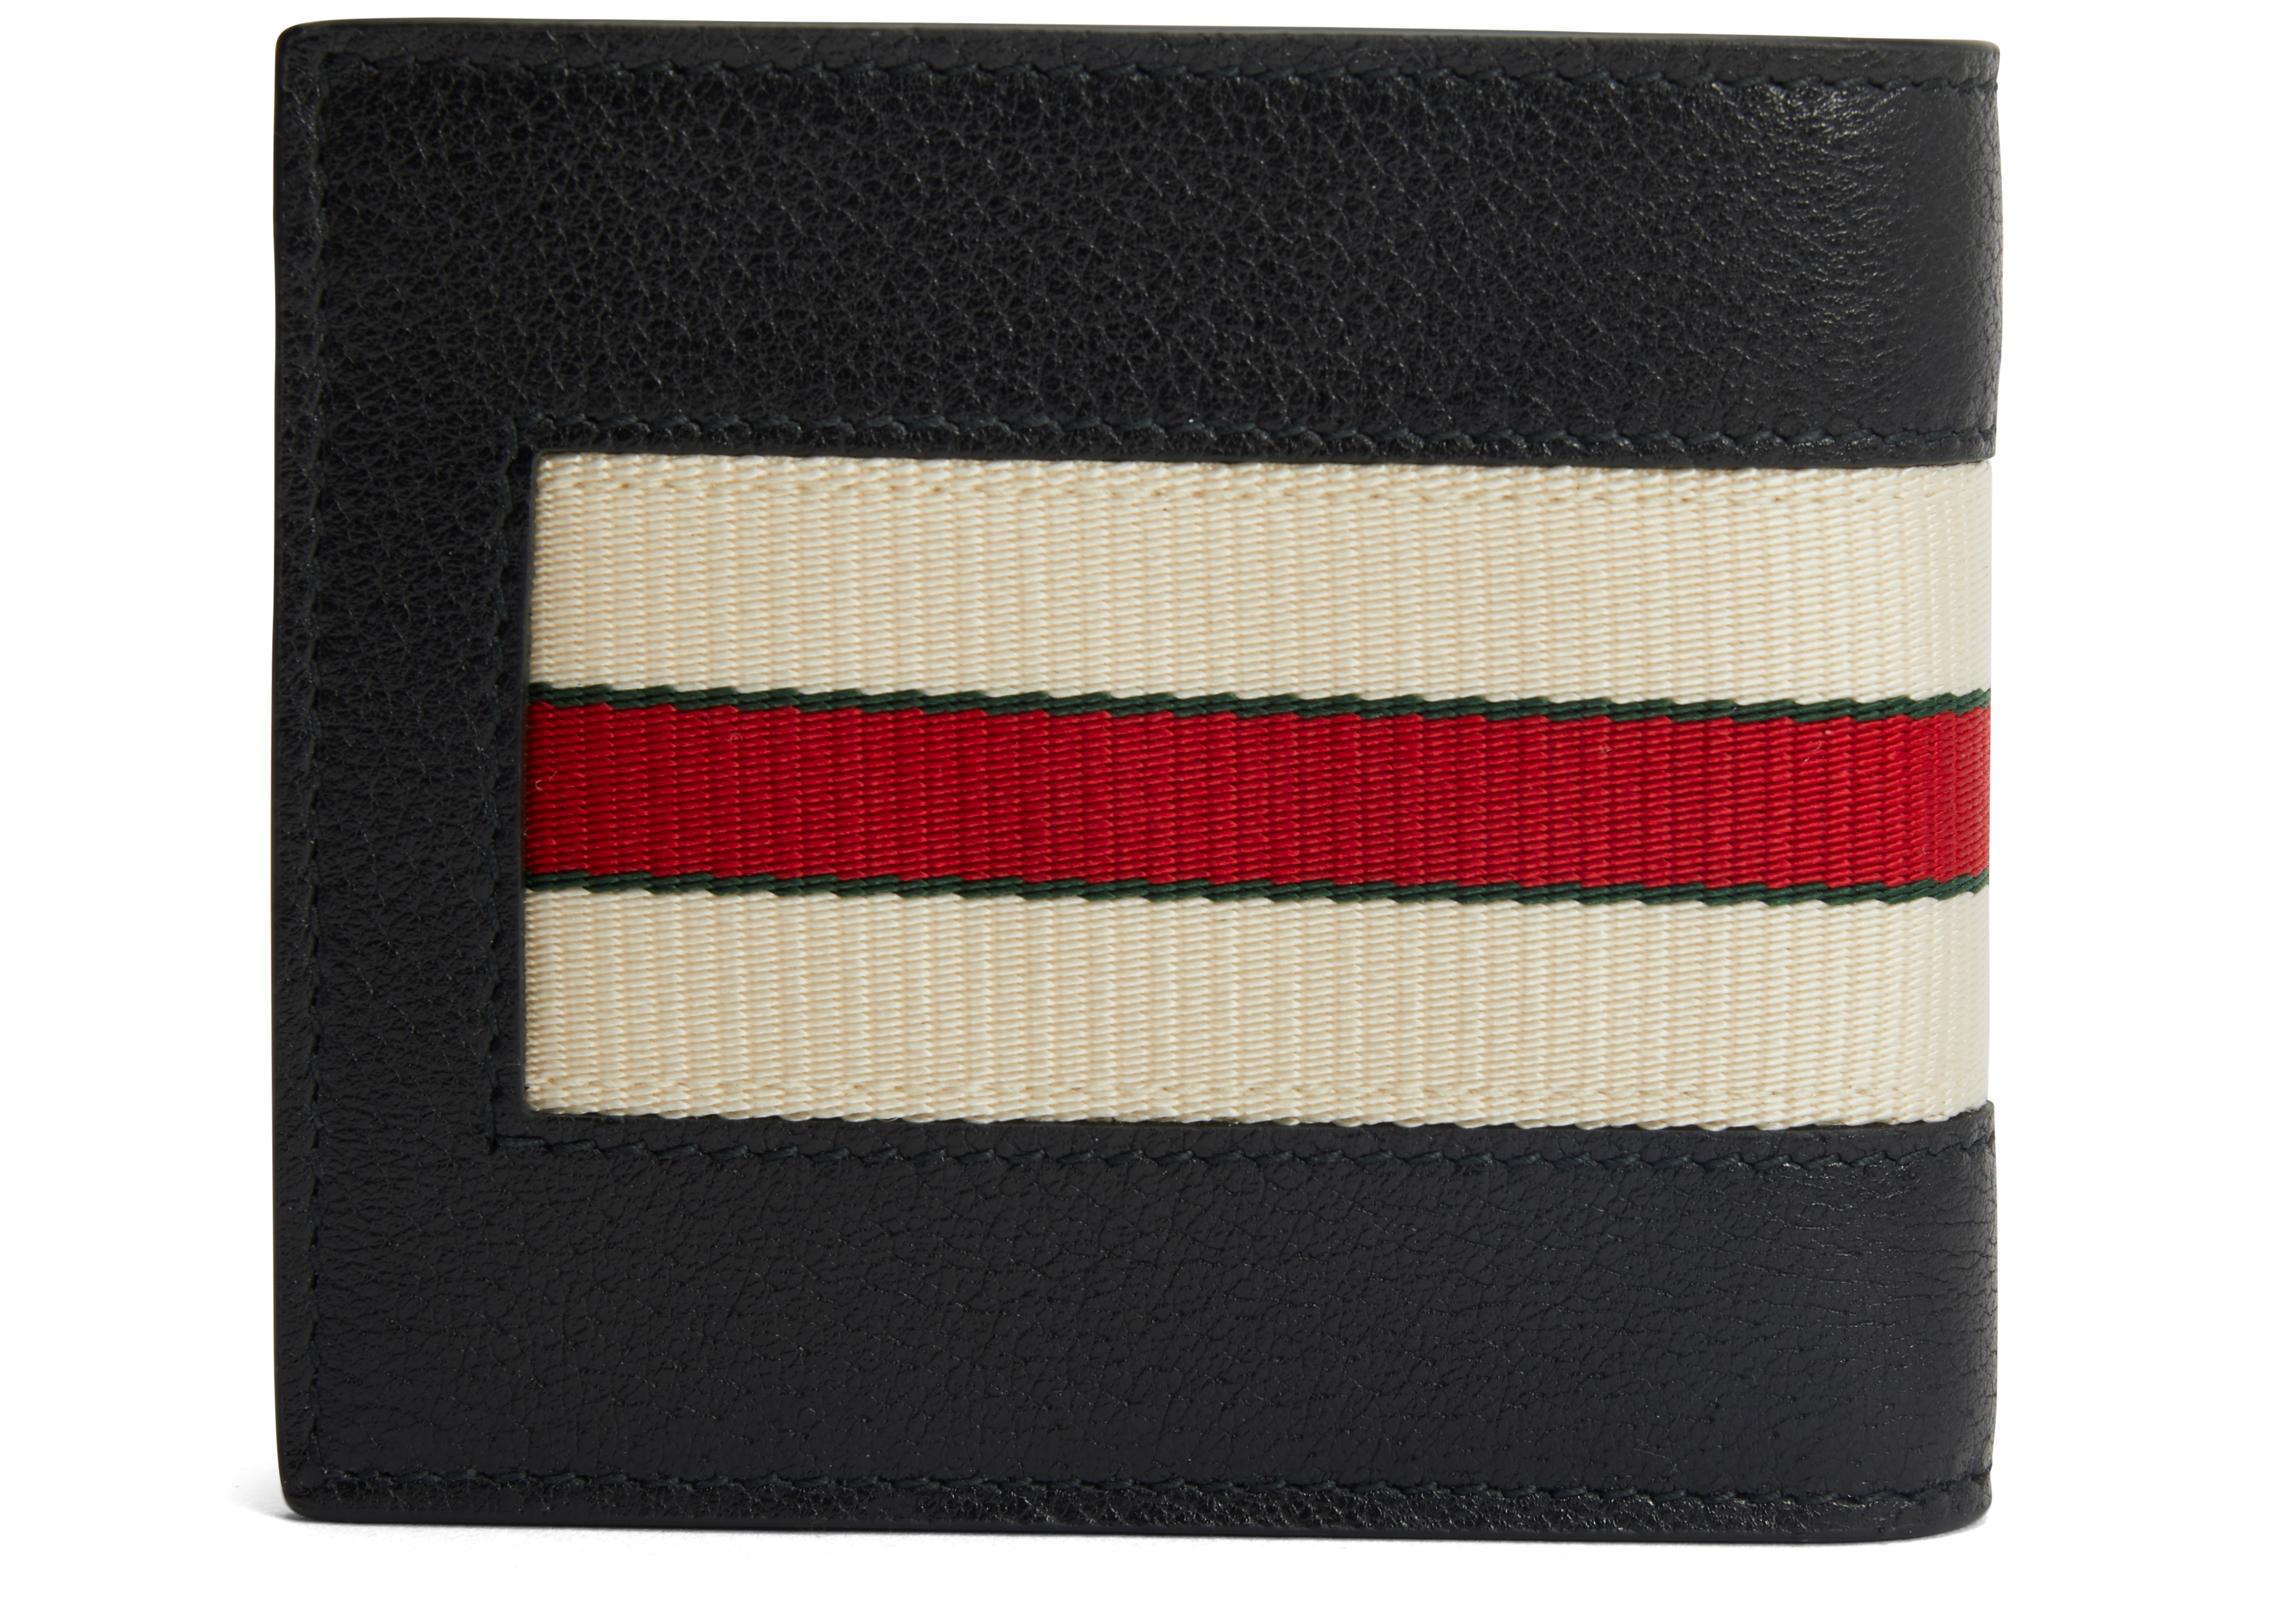 gucci wallet with stripe